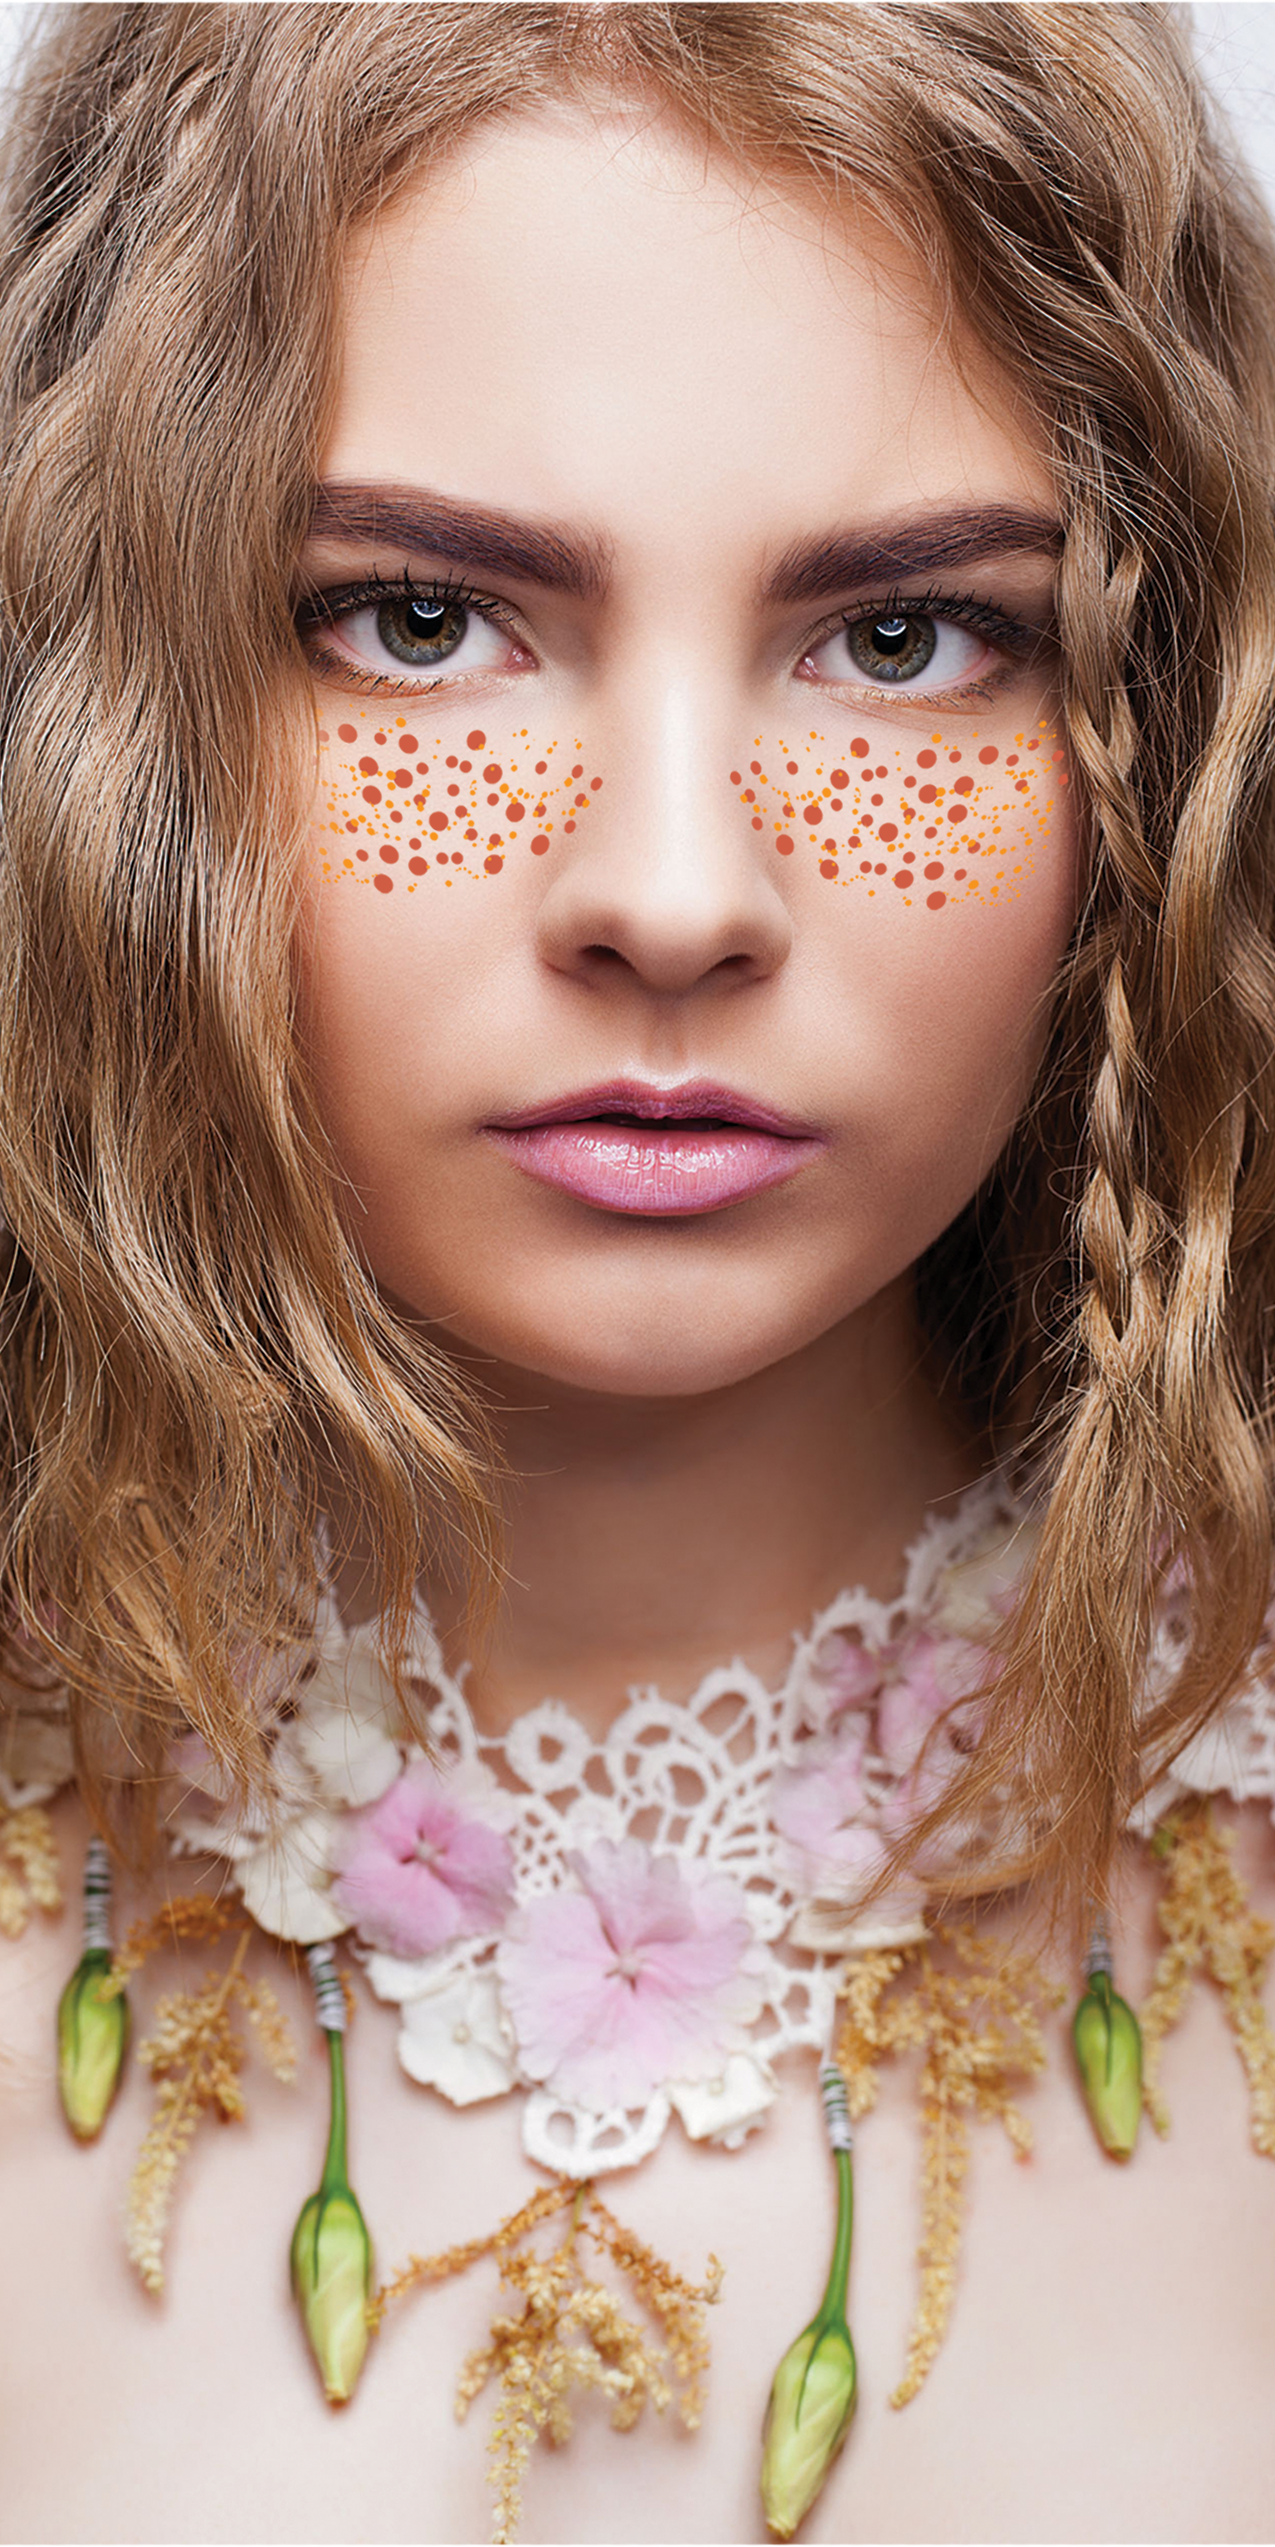 New Metallic Freckle Face Temporary Tattoos